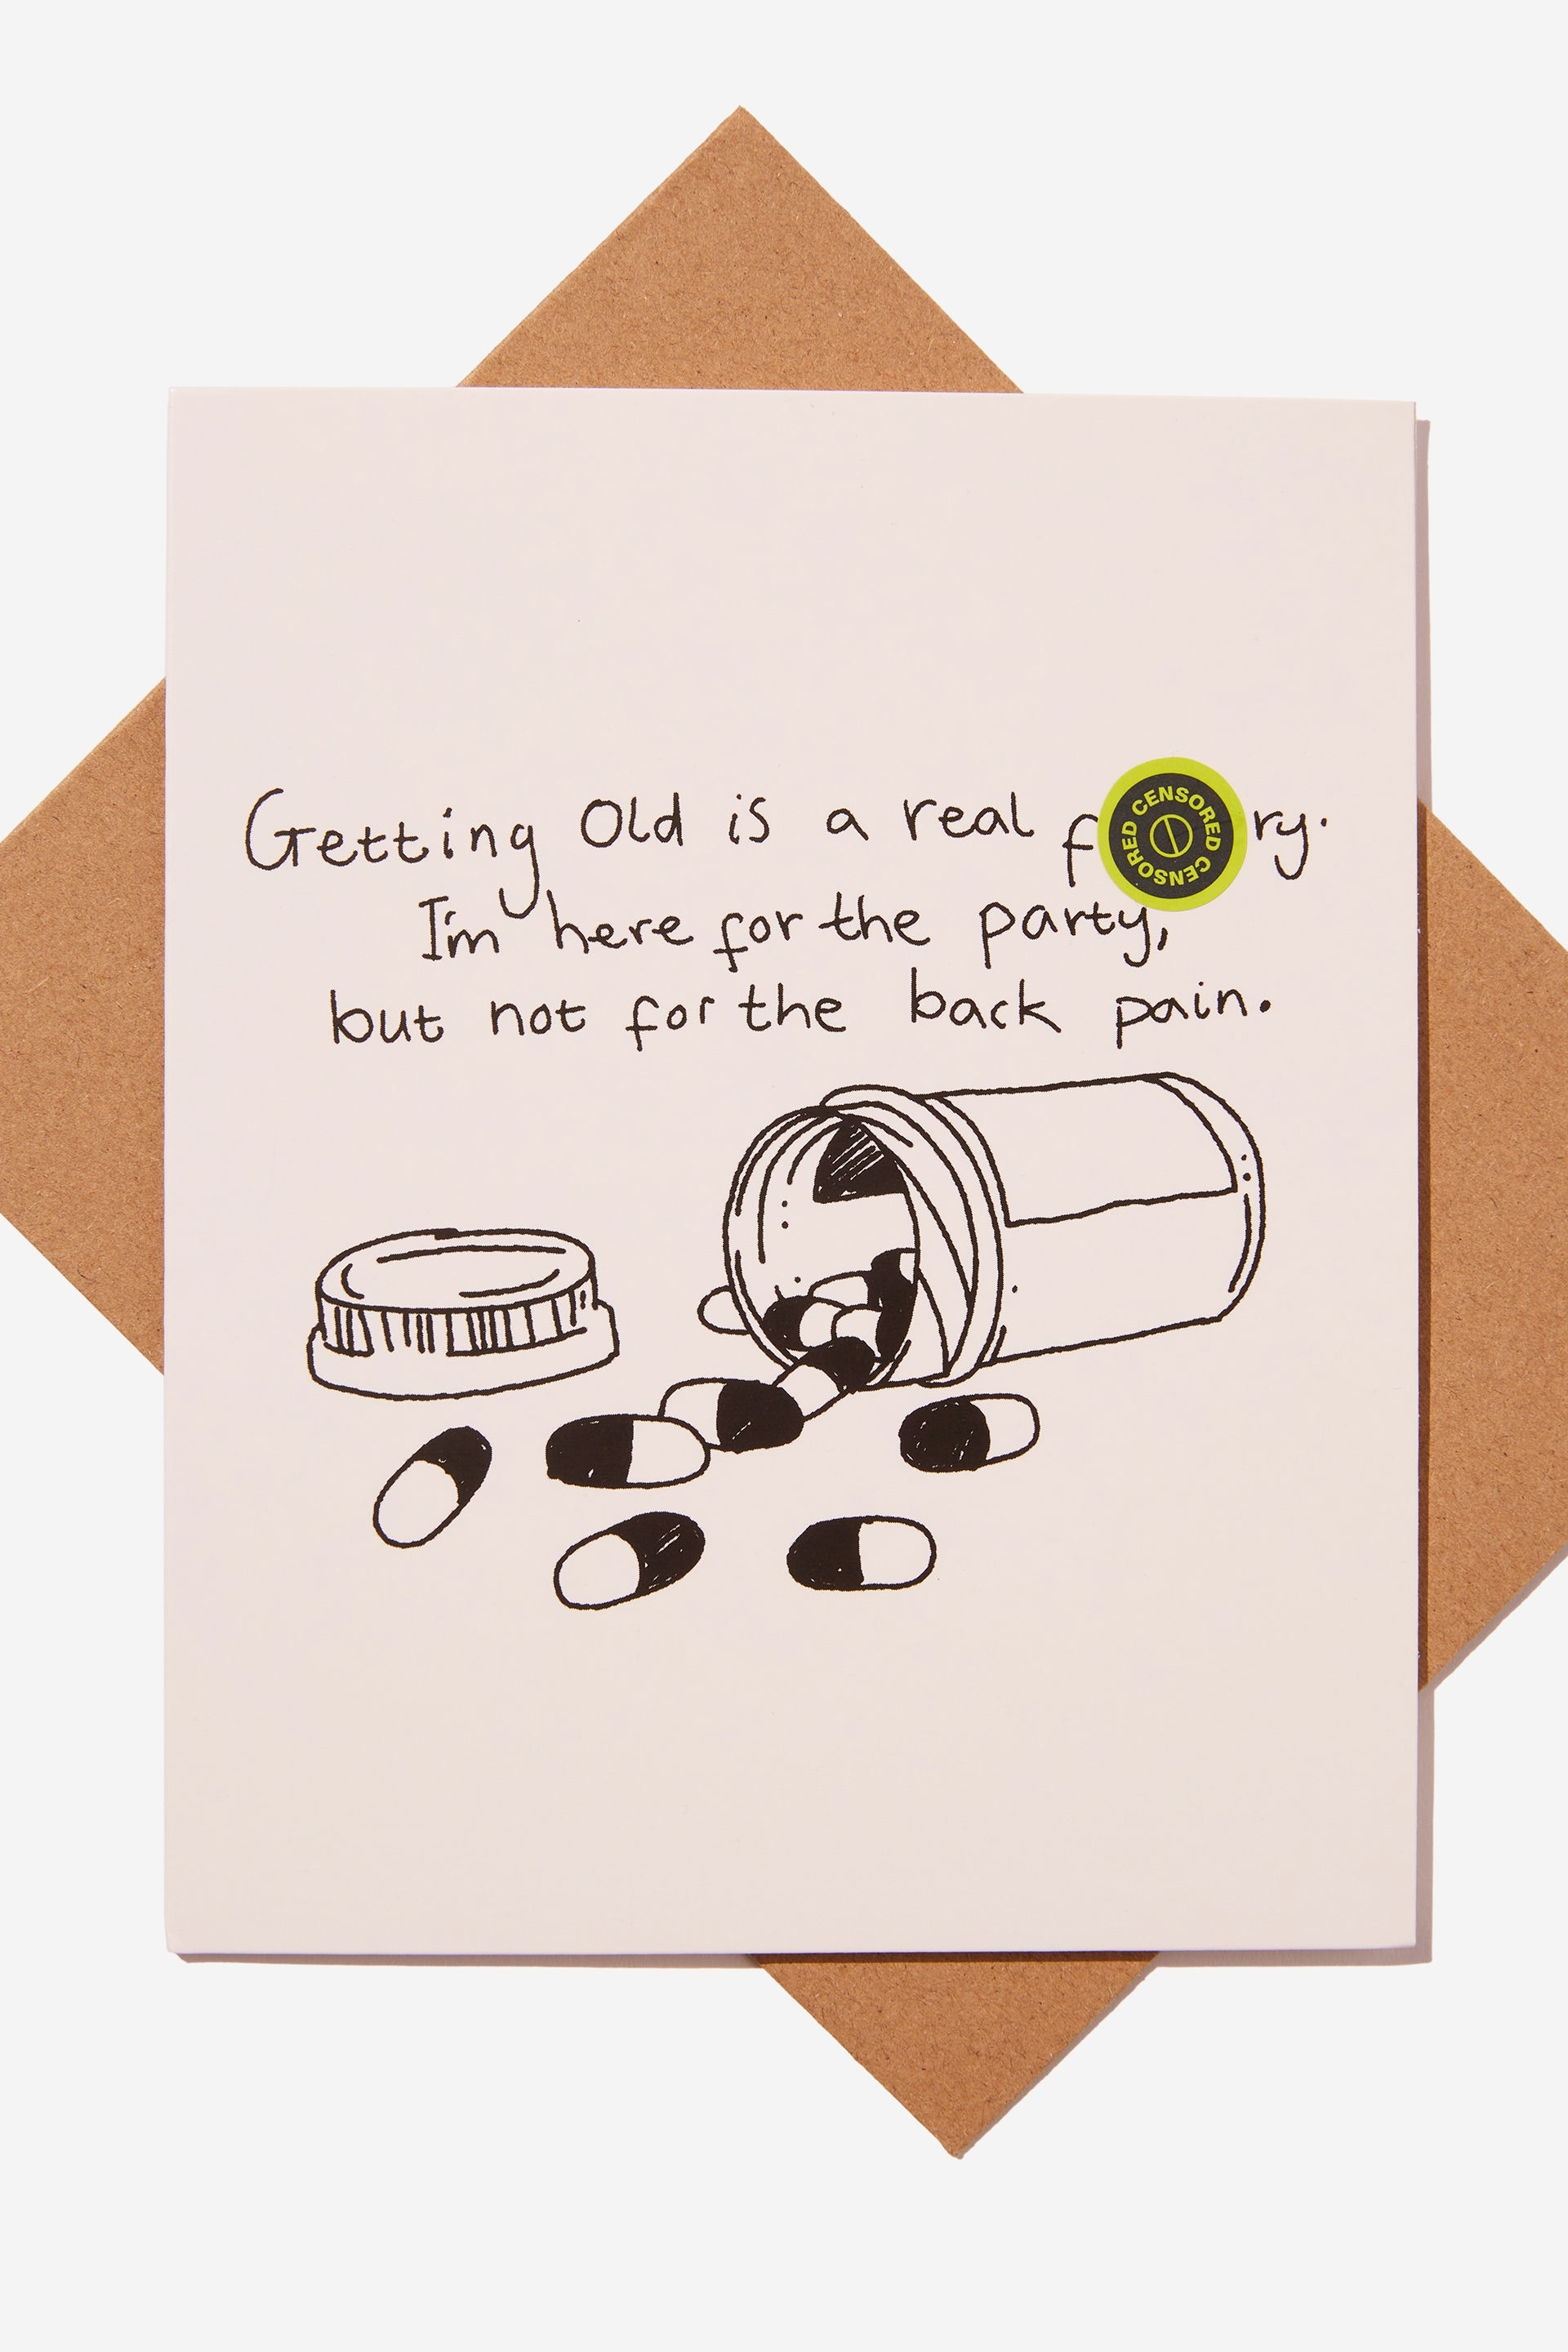 Typo - Funny Birthday Card - Getting old back pain!!